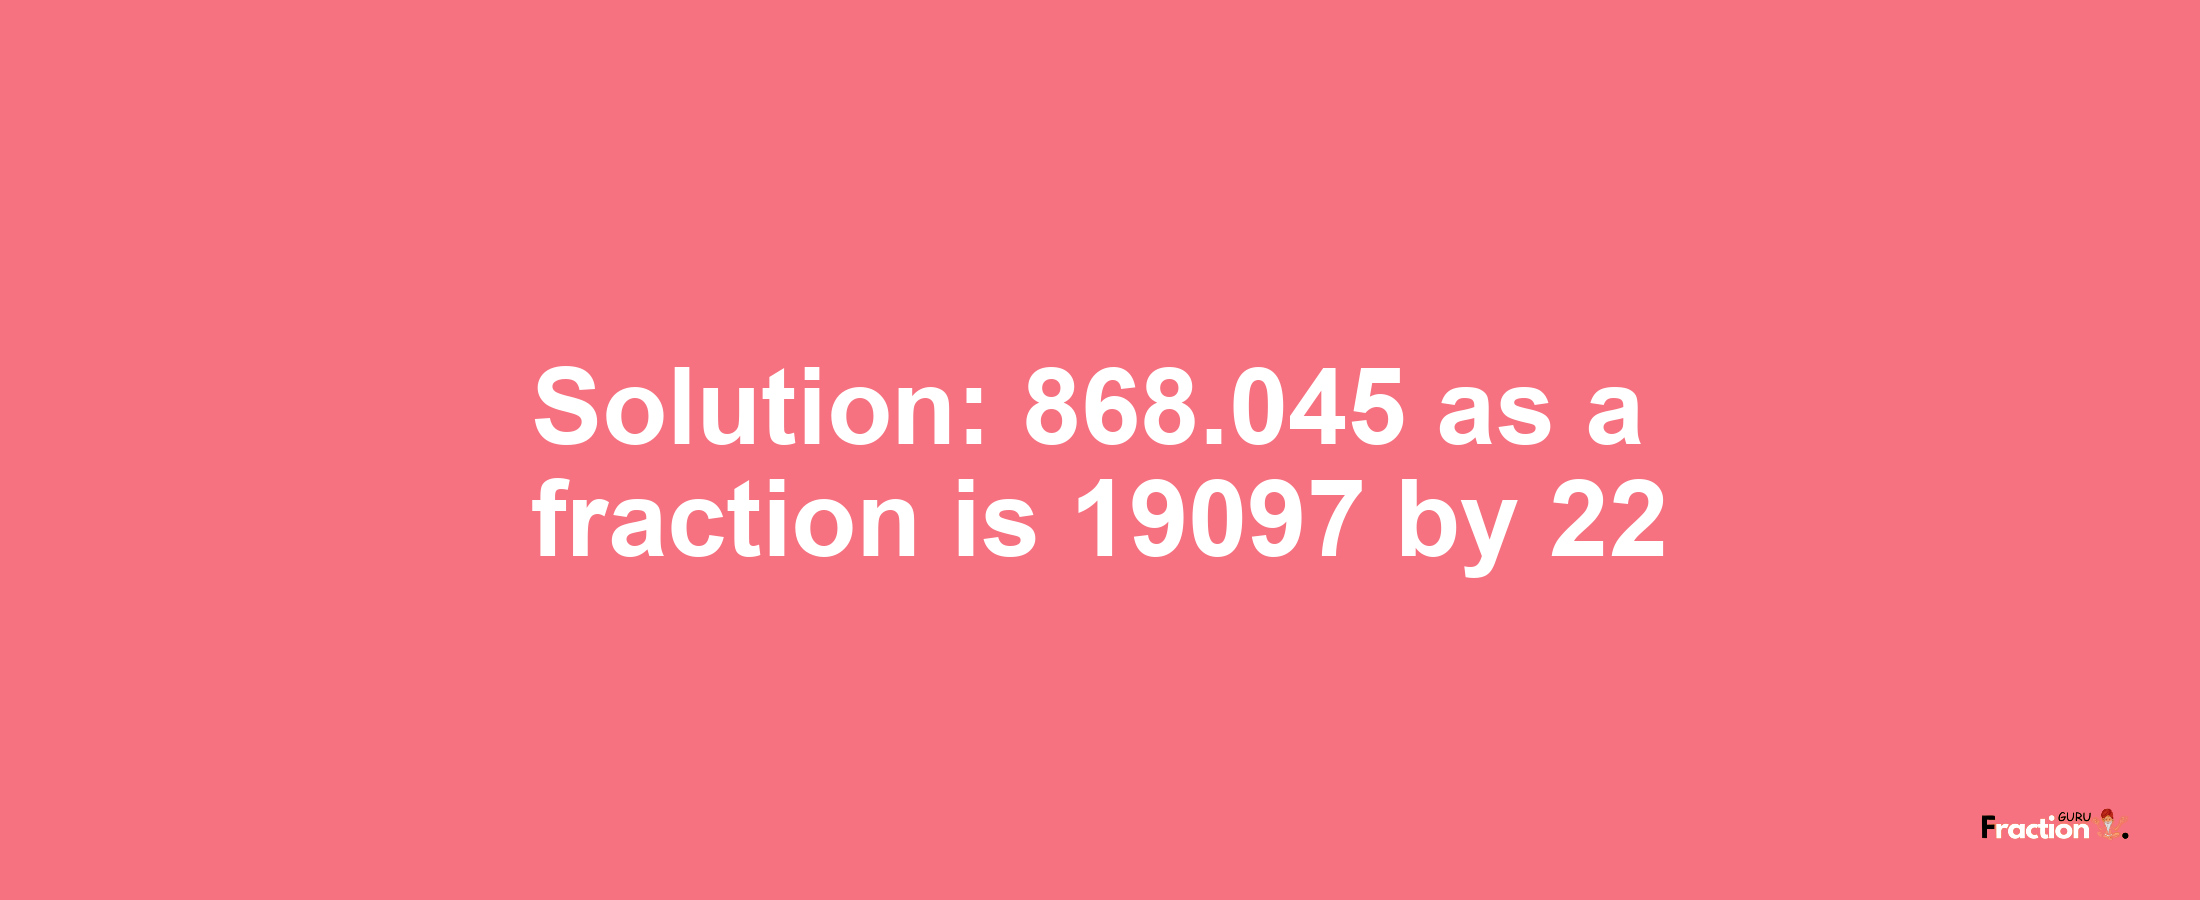 Solution:868.045 as a fraction is 19097/22